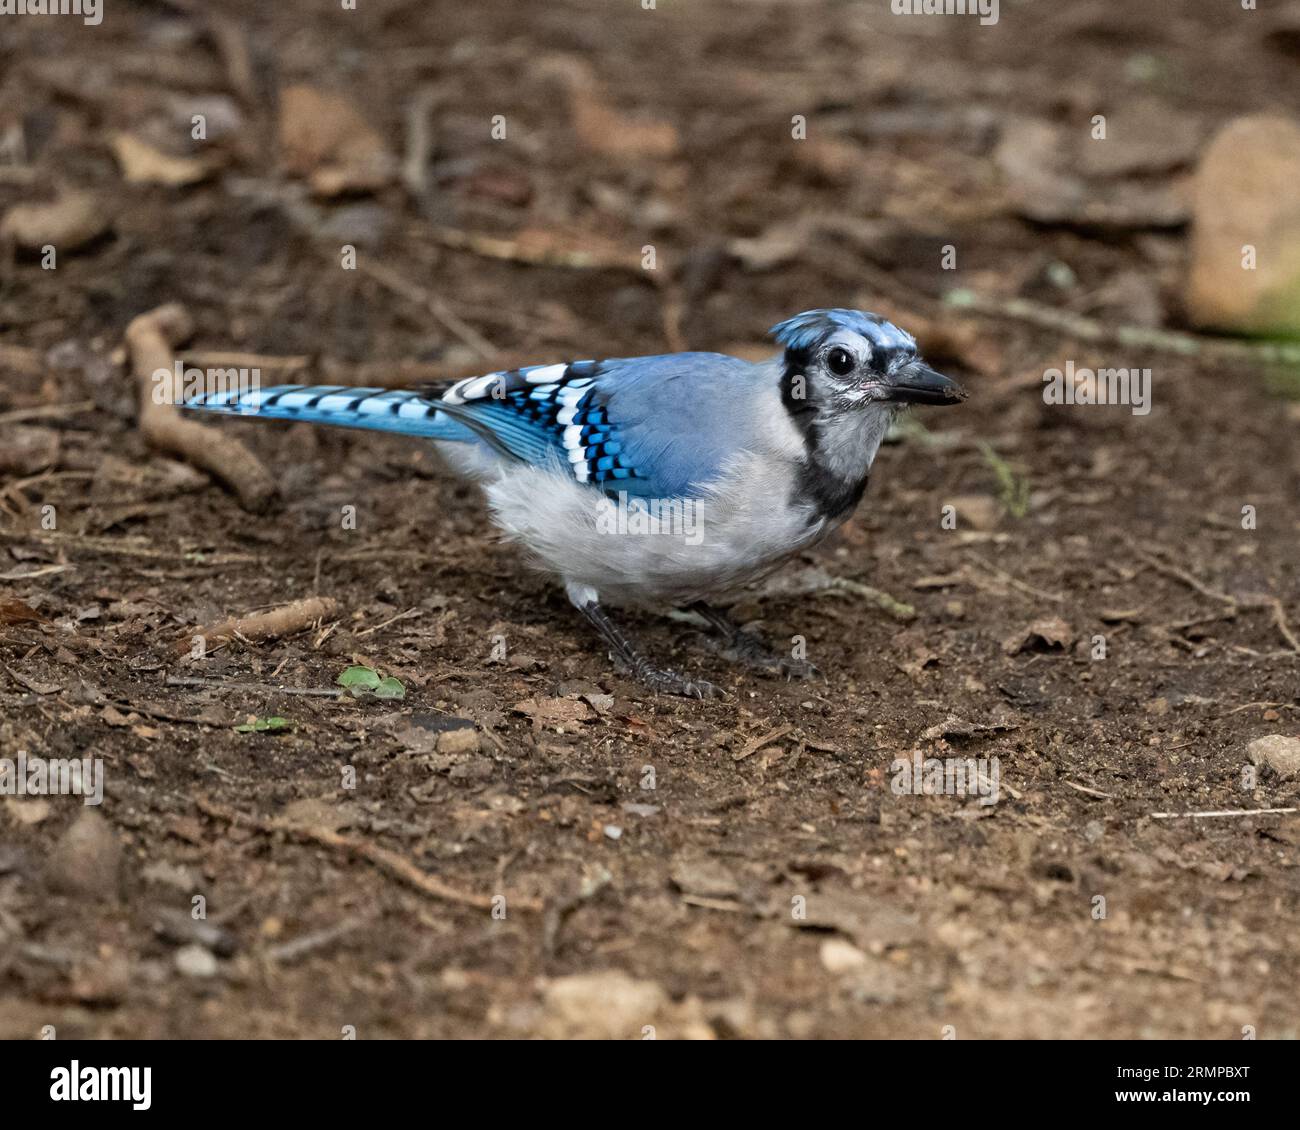 A Blue Jay, Cyanocitta cristata, picking up seeds in the dirt on a trail in the Adirondack Mountains, NY USA Stock Photo